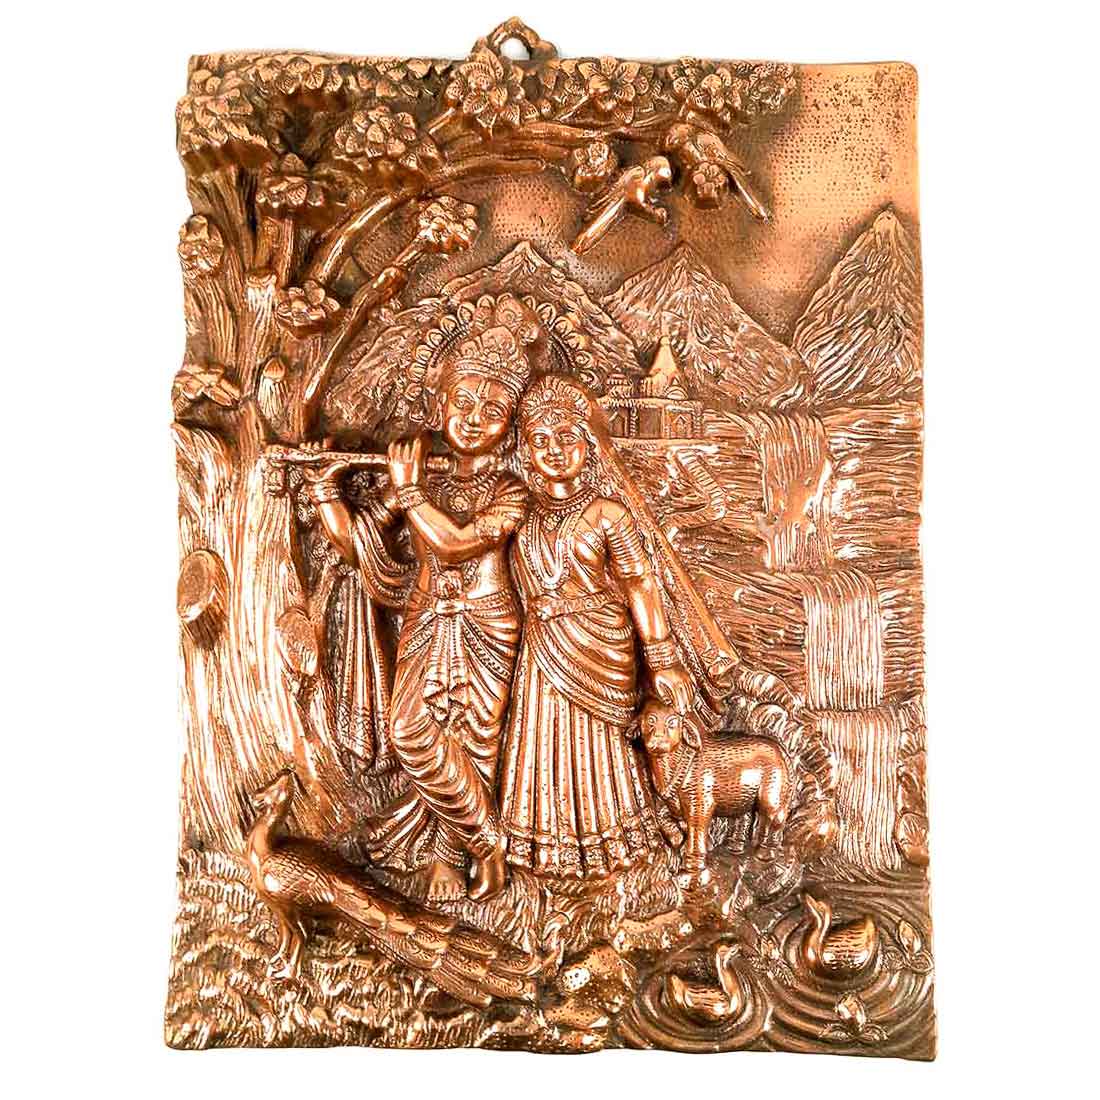 Radha Krishna Idol Wall Hanging Art | Radhe Krishna Playing Flute With Cow And Peacock Wall Statue Murti | Wedding Gift for Couples | Religious Gift - for Home, Living Room, Office, Puja , Entrance Decoration- 22 Inch